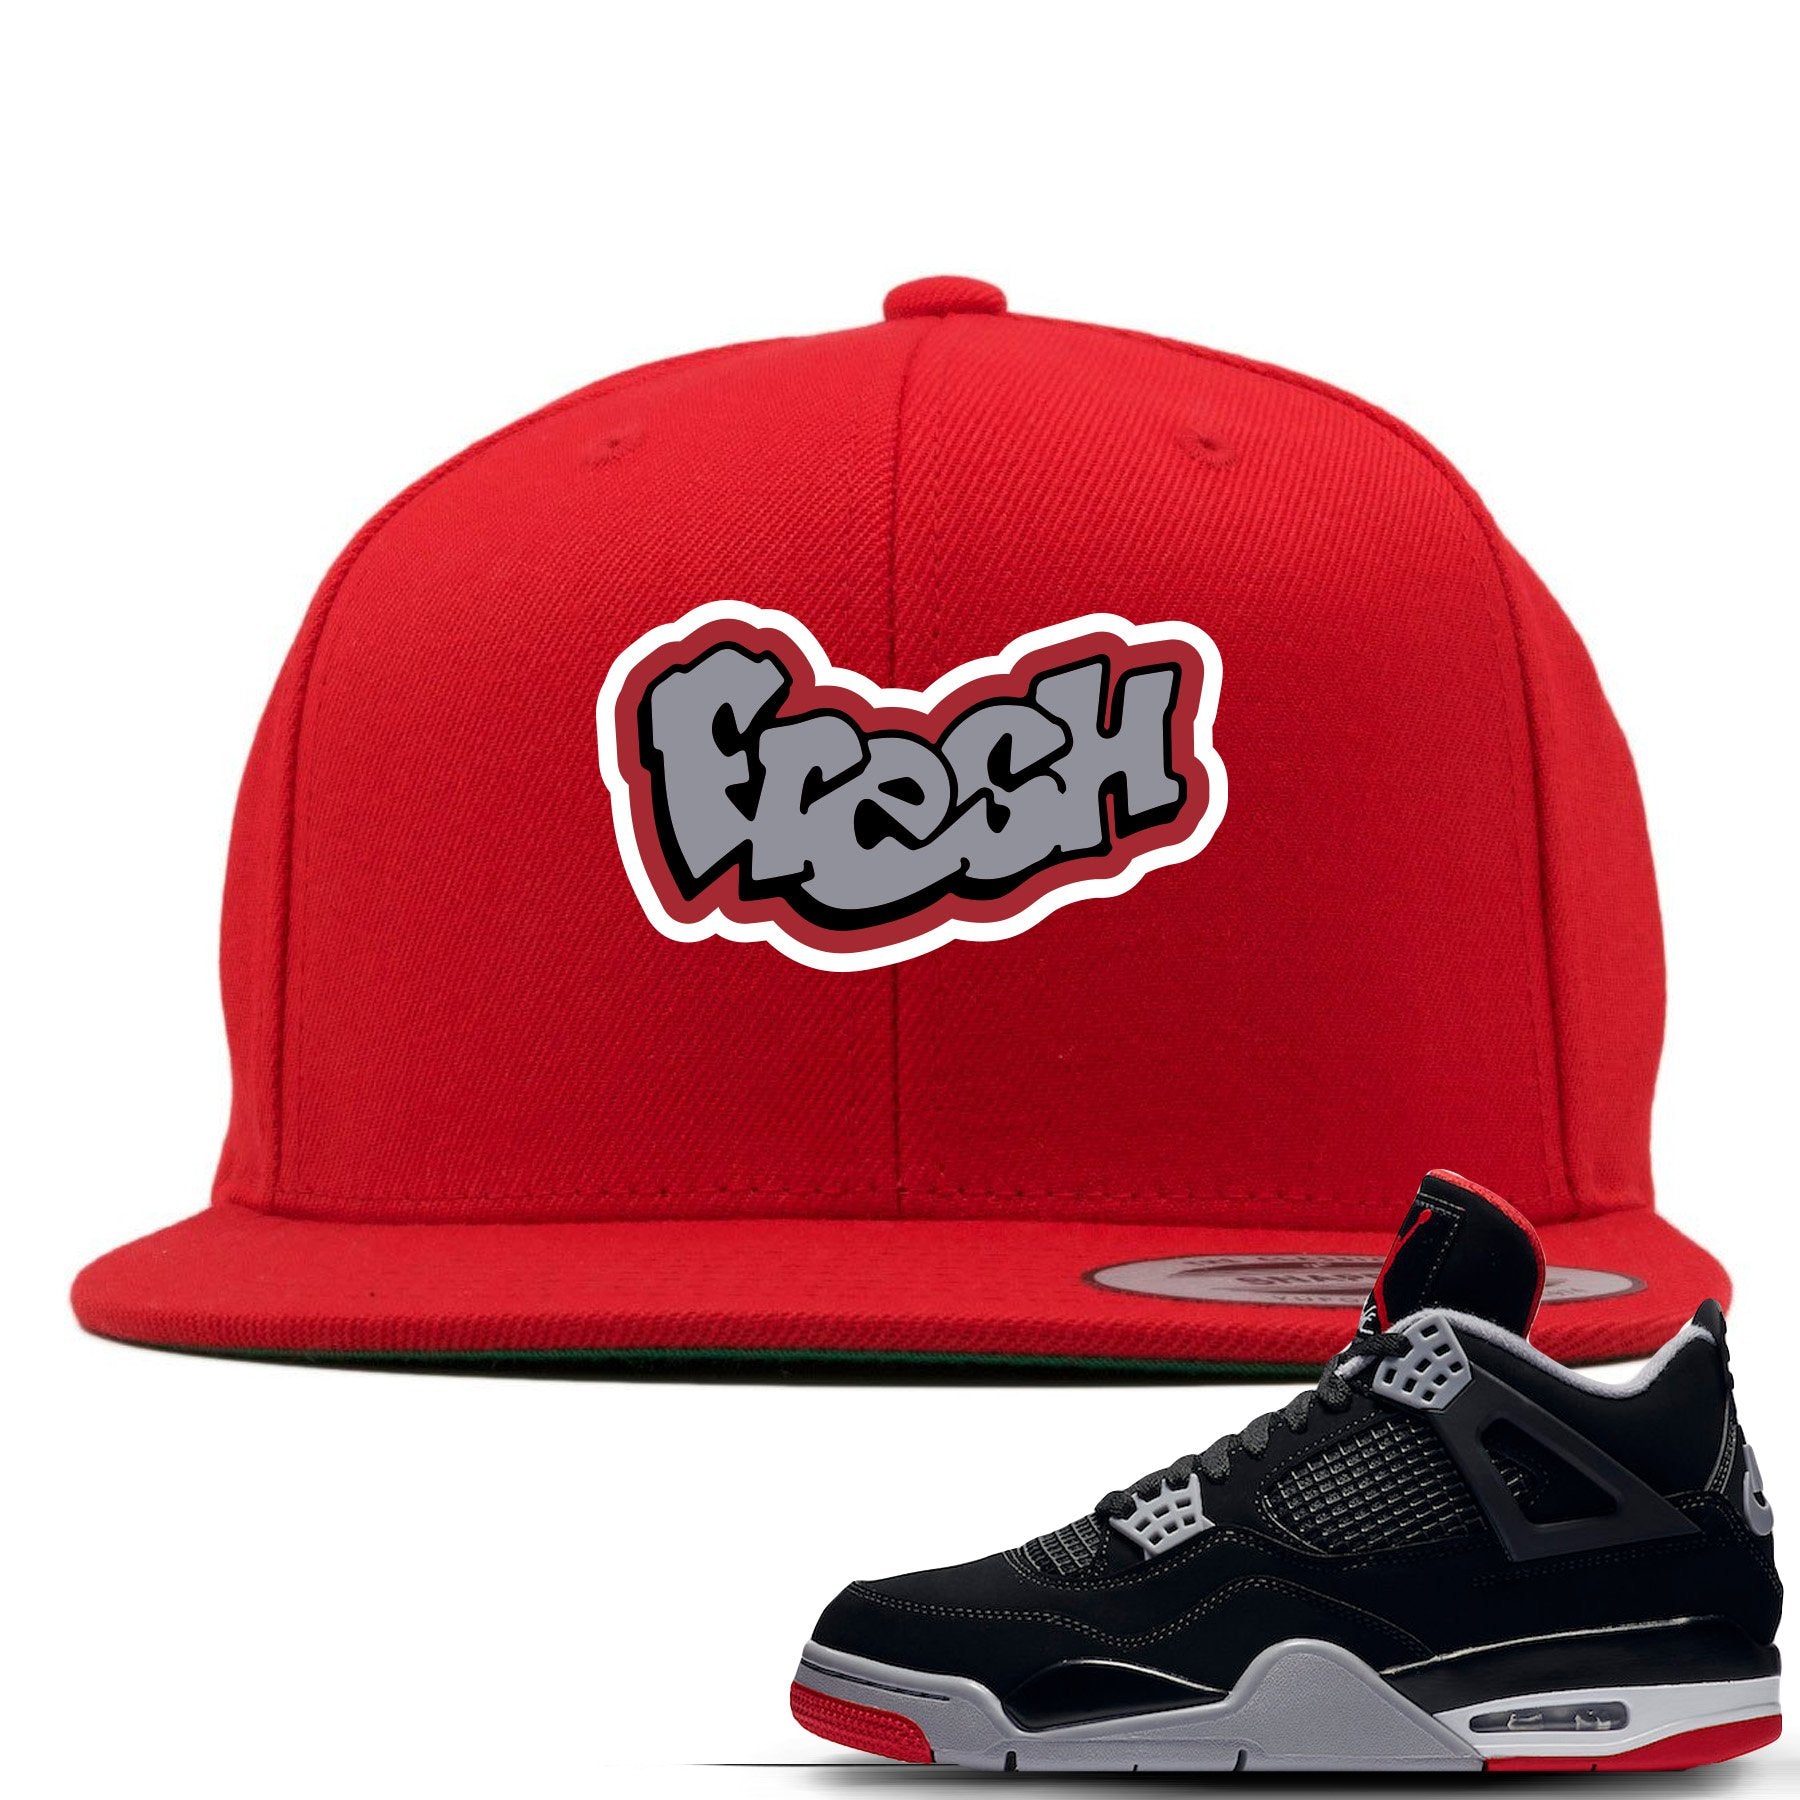 This red and grey snapback will match great with your Air Jordan 4 Bred shoes